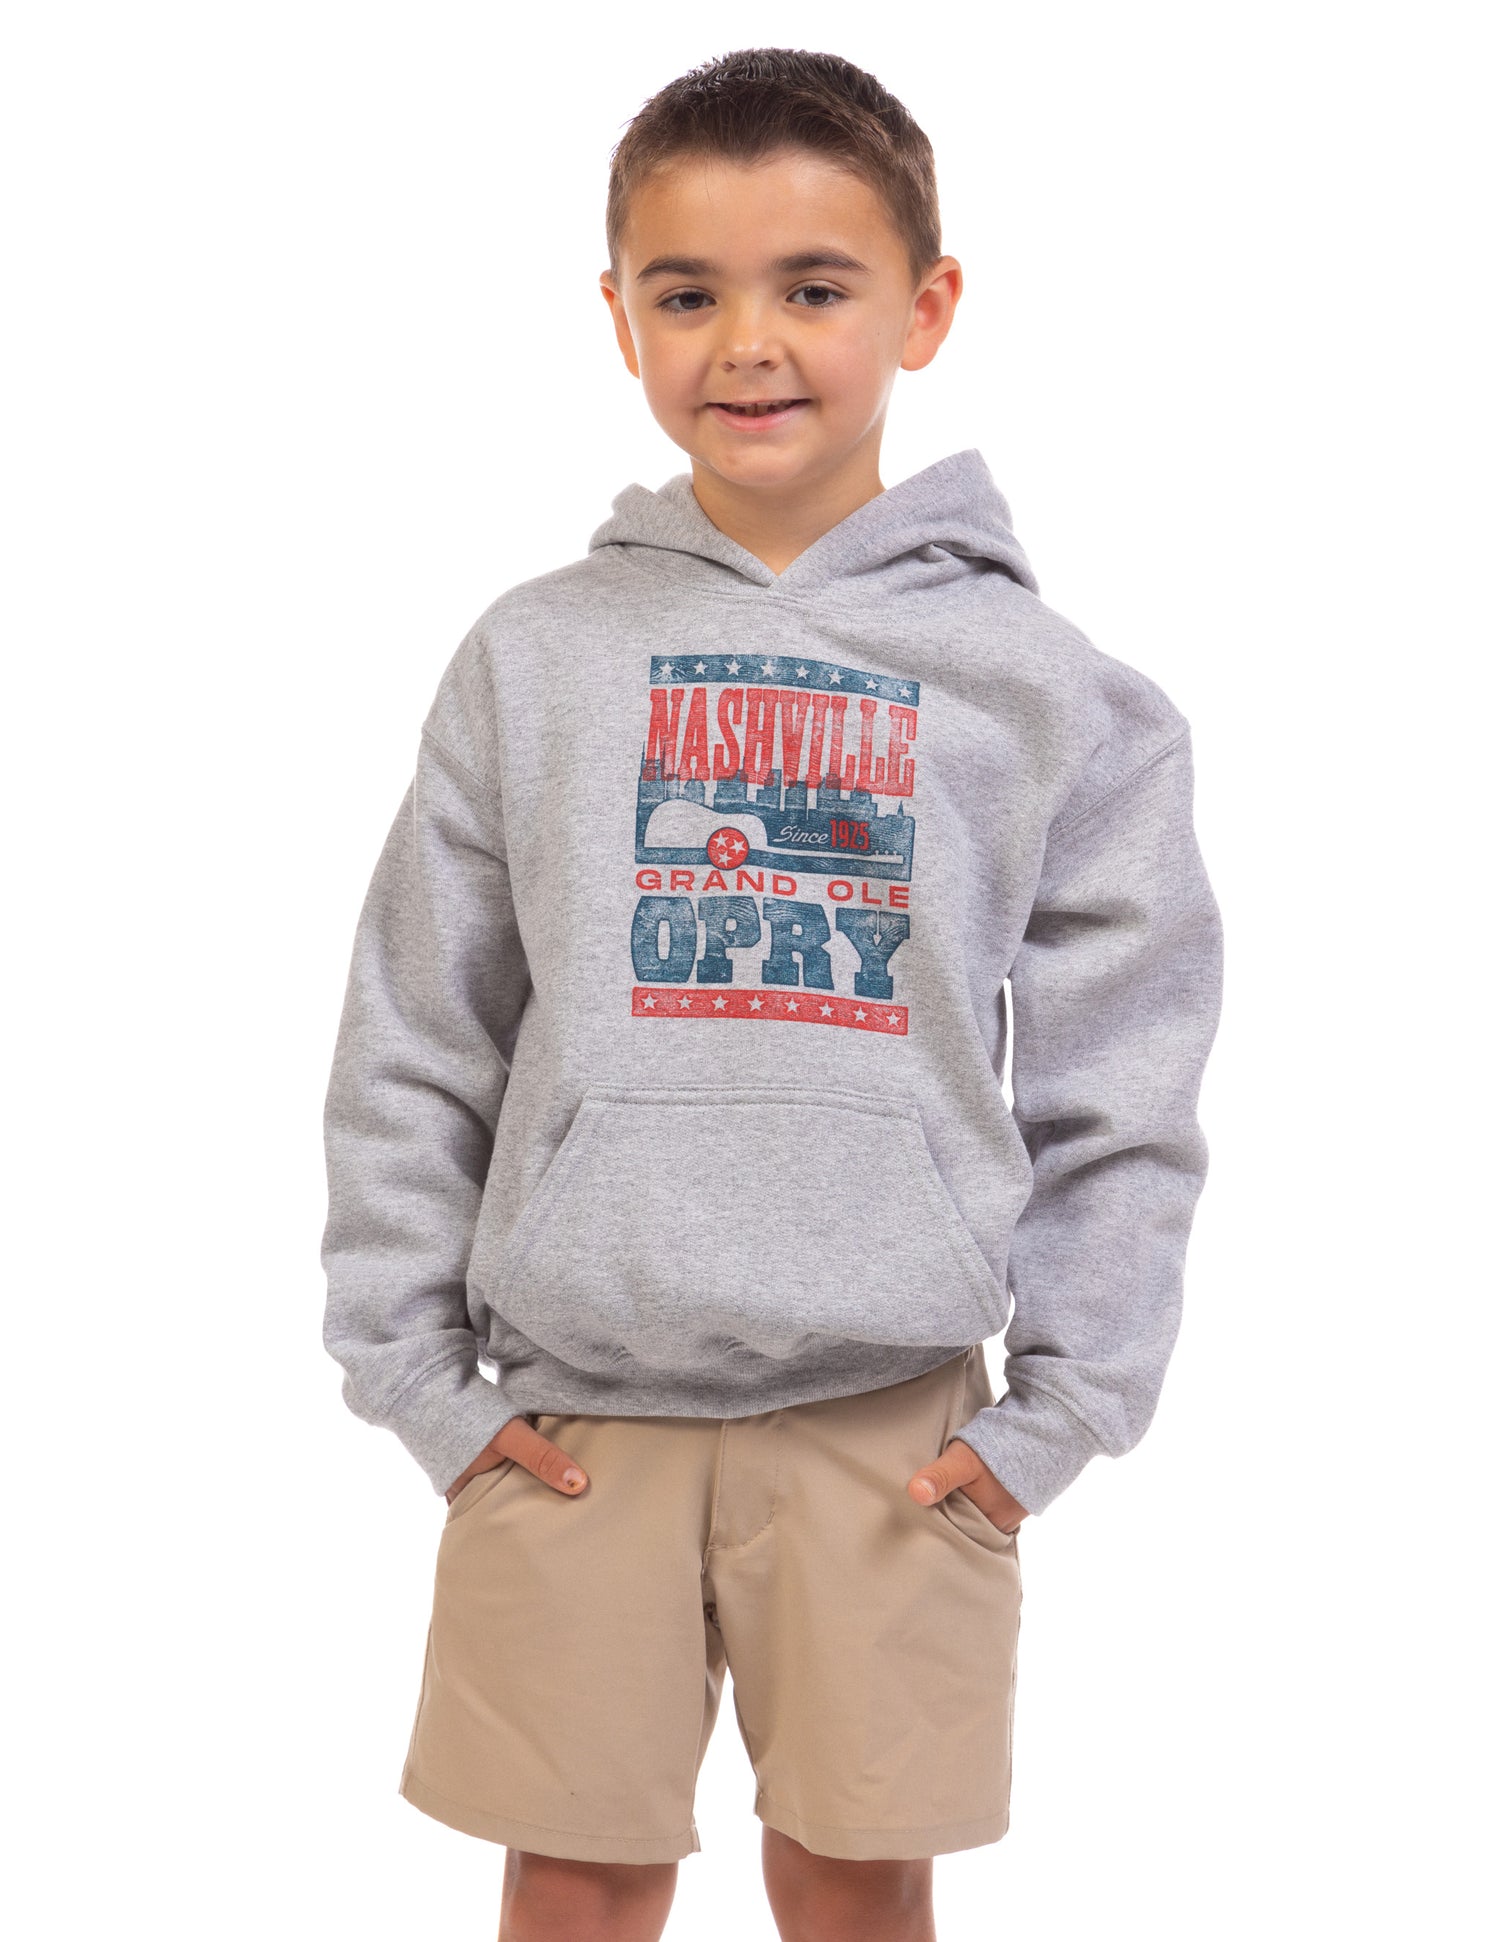 Opry Nashville Poster Youth Hoodie